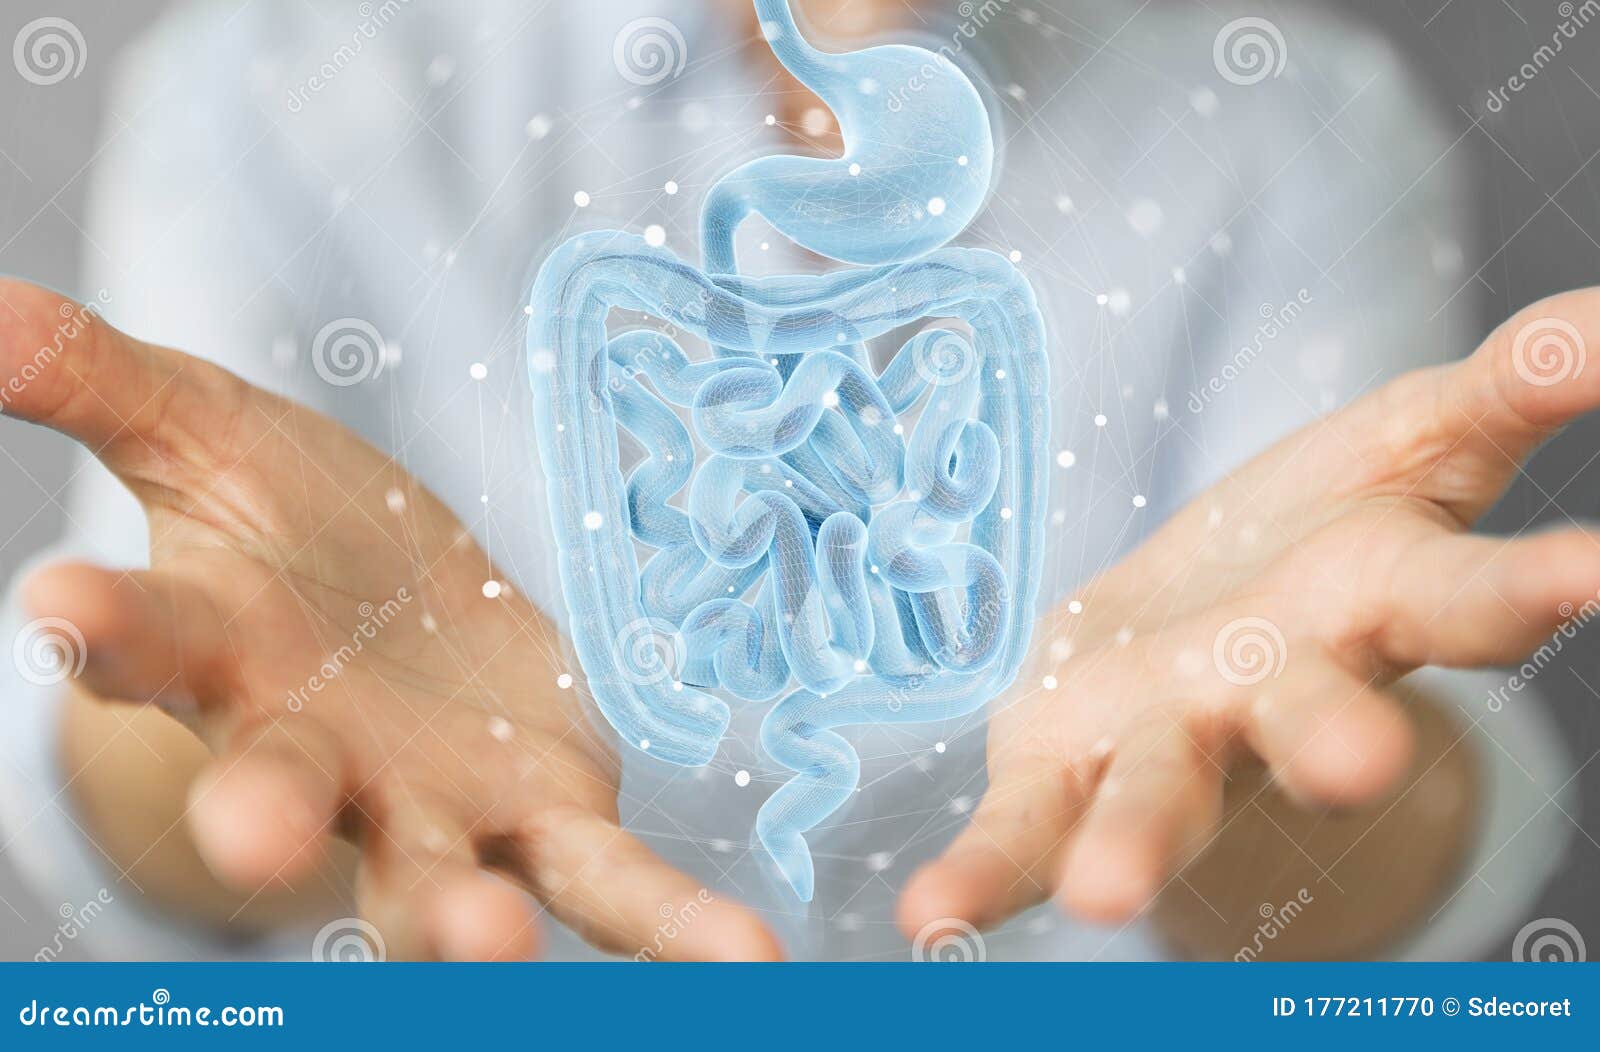 woman using digital x-ray of human intestine holographic scan projection 3d rendering